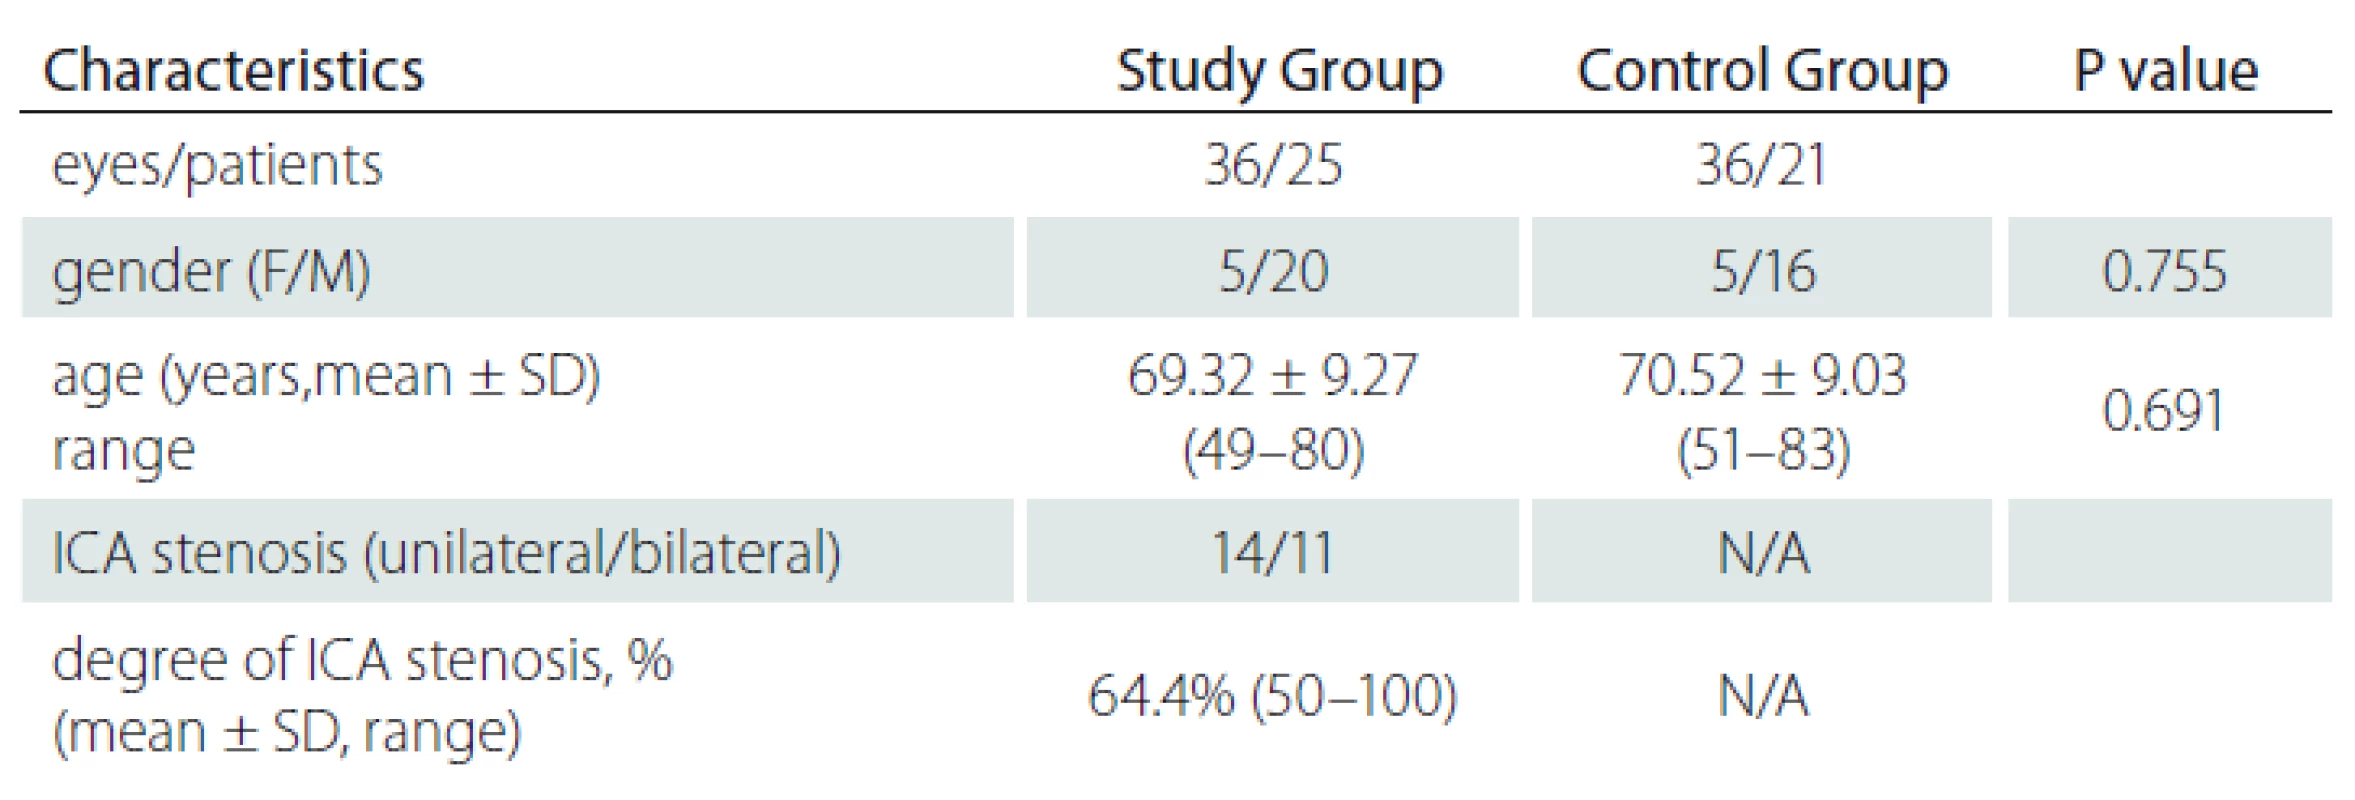 Demographic and clinical characteristics of study participants.